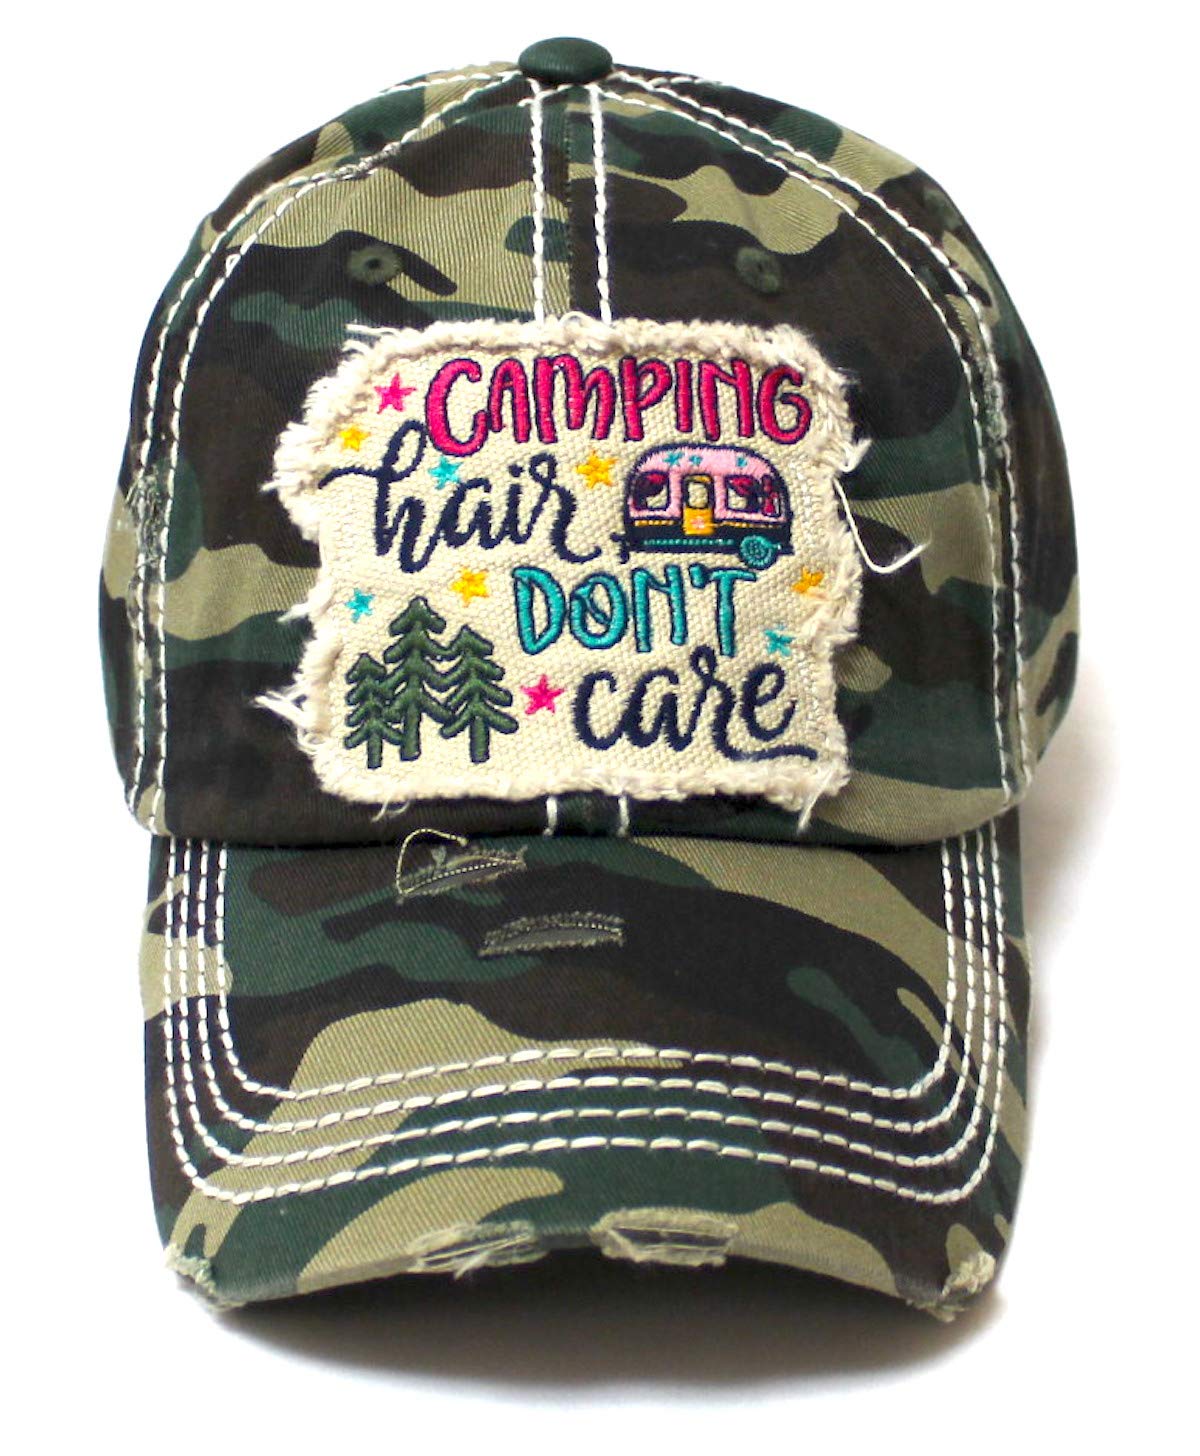 CAPS 'N VINTAGE Women's Baseball Cap Camping Hair Don't Care Patch Embroidery Monogram Hat, Army Camoflauge - Caps 'N Vintage 